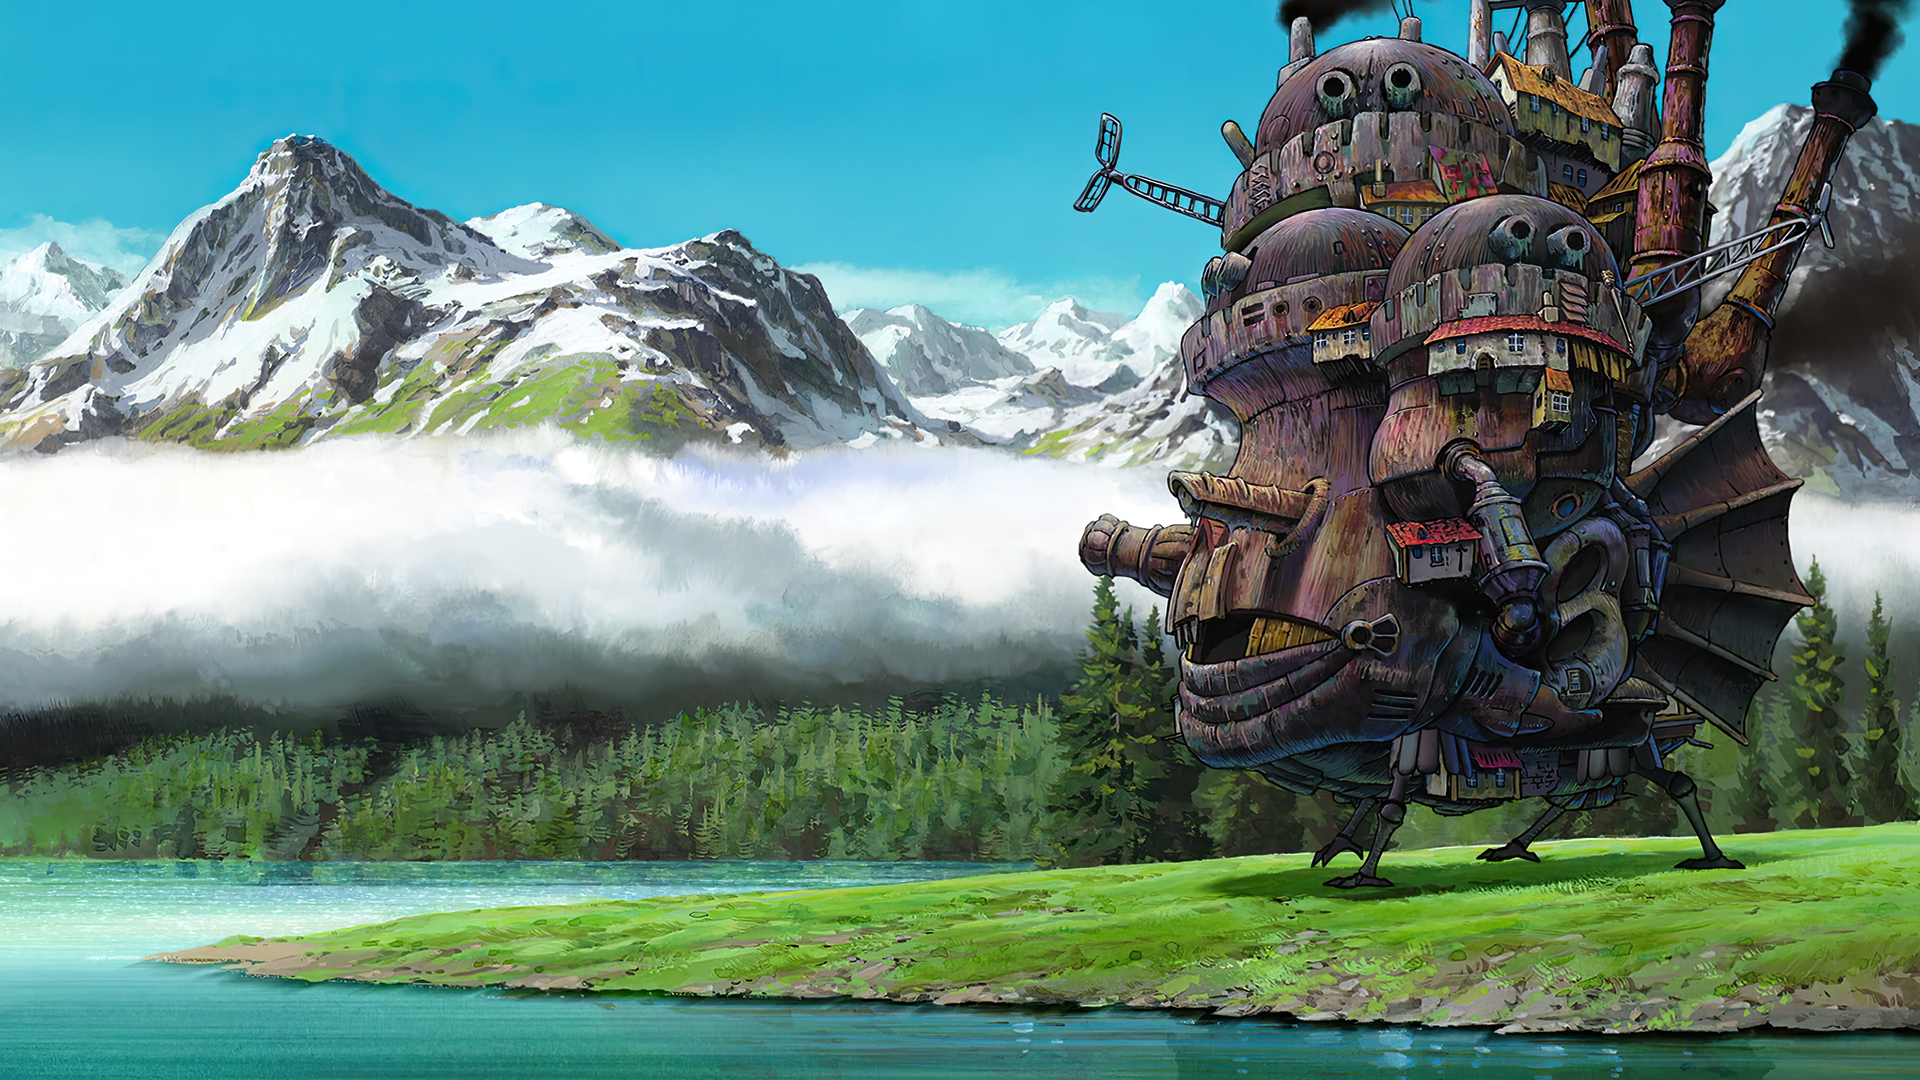 Anime 1920x1080 Howl's Moving Castle animated movies anime animation film stills Studio Ghibli Hayao Miyazaki mountains sky clouds water trees forest